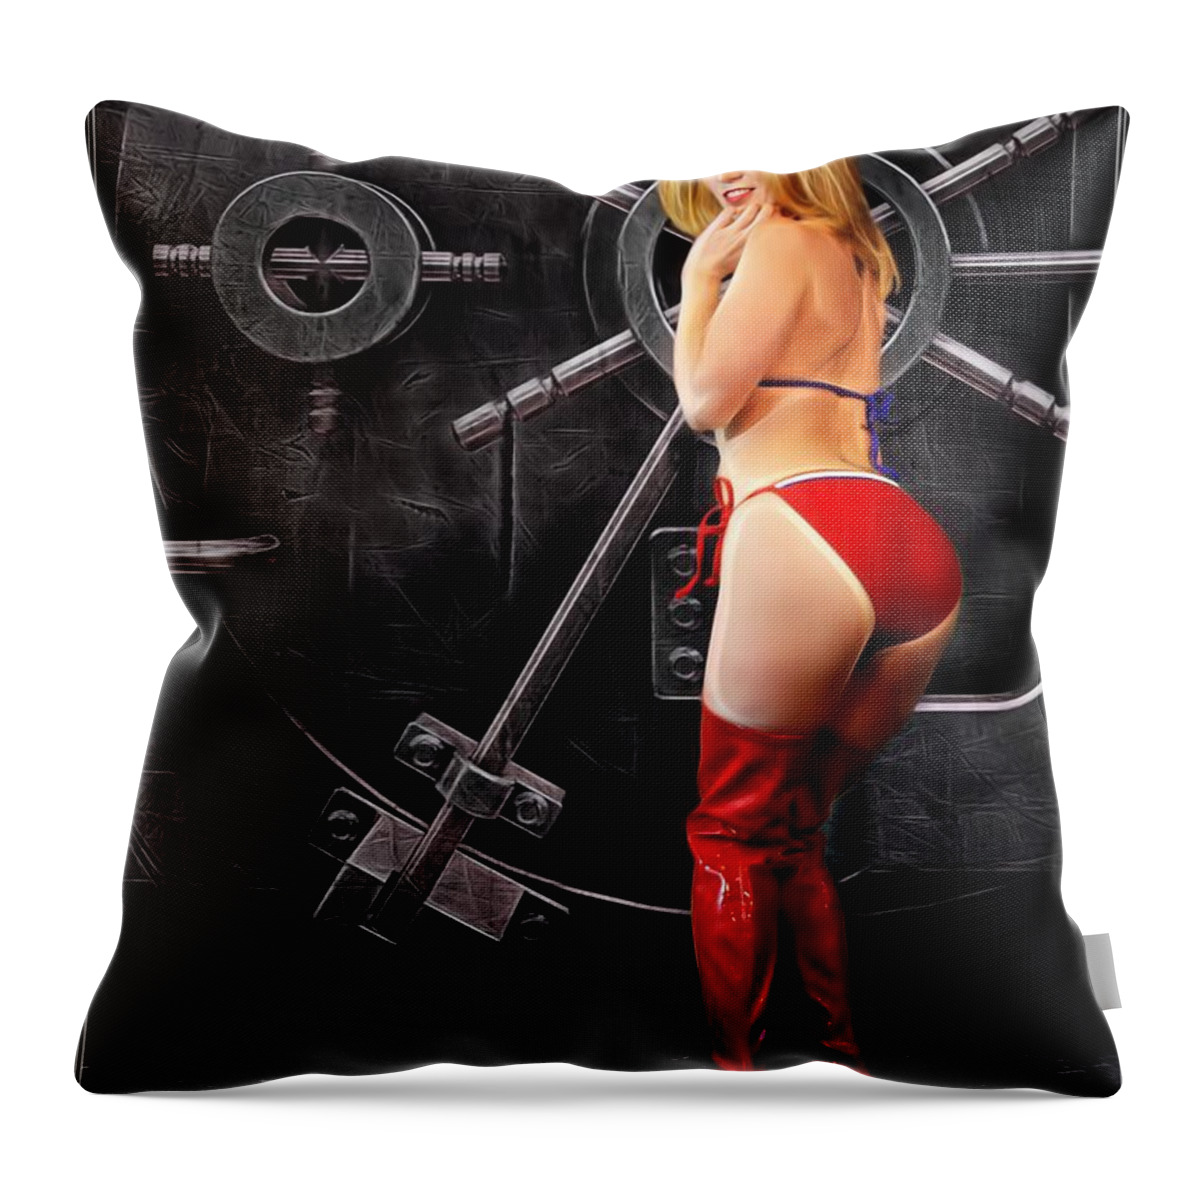 Fantasy Throw Pillow featuring the painting Who Me Open This Vault by Jon Volden